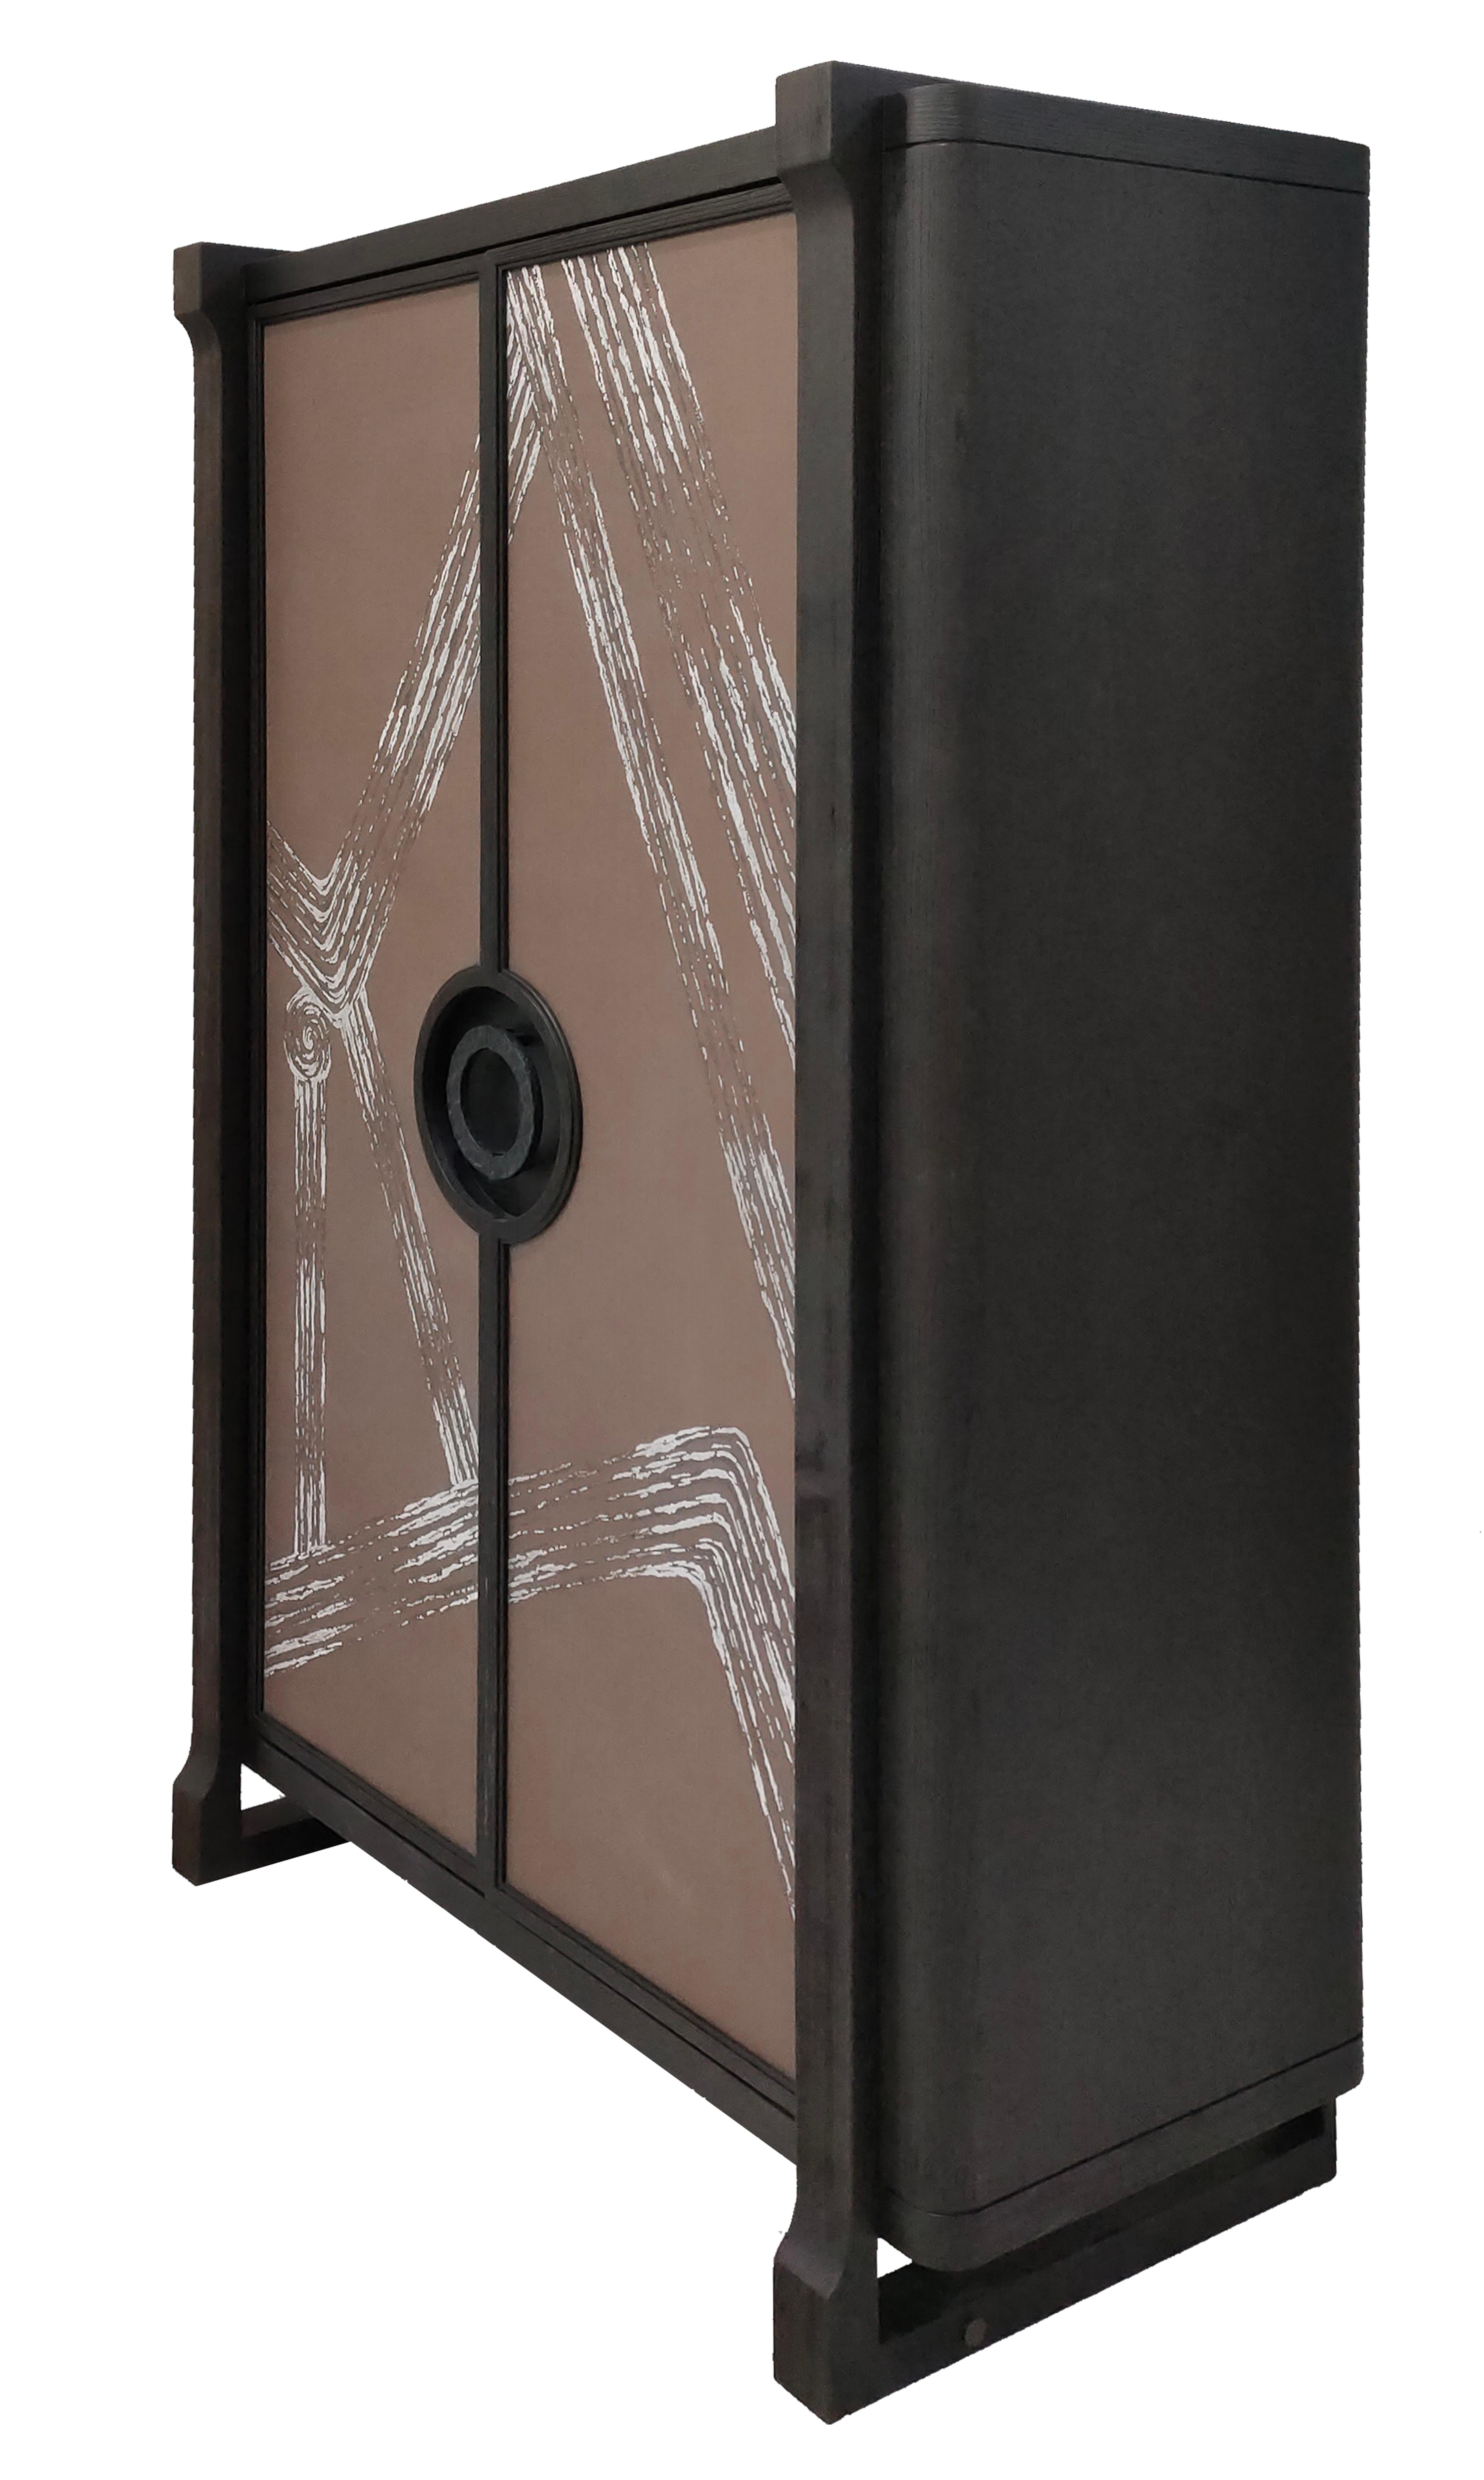 Description: High cabinet in pinewood and oak wood with De Gournay covering
Color: Charcoal and raw earth
Size: 120 x 54 x 170 H cm
Material: Pinewood and oak wood
Collection: Art Déco Garden.